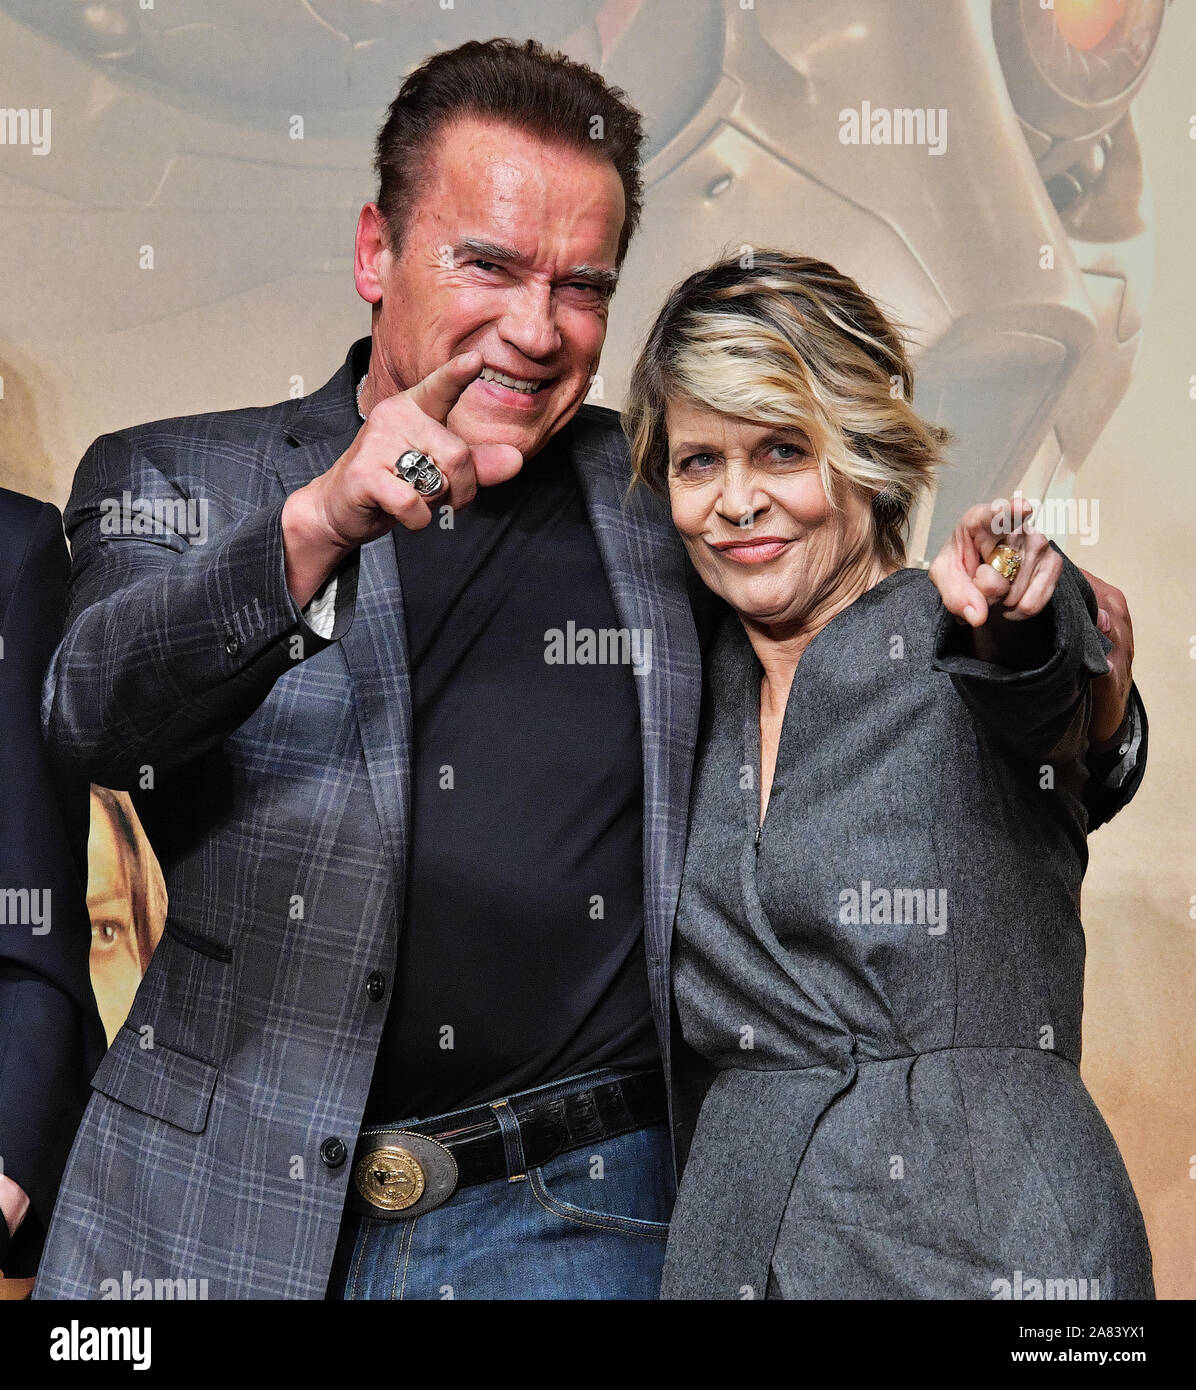 Actor Arnold Schwarzenegger(L) and actress Linda Hamilton attend the press conference for the film 'Terminator: Dark Fate' in Tokyo, Japan on November 5, 2019. Credit: AFLO/Alamy Live News Stock Photo